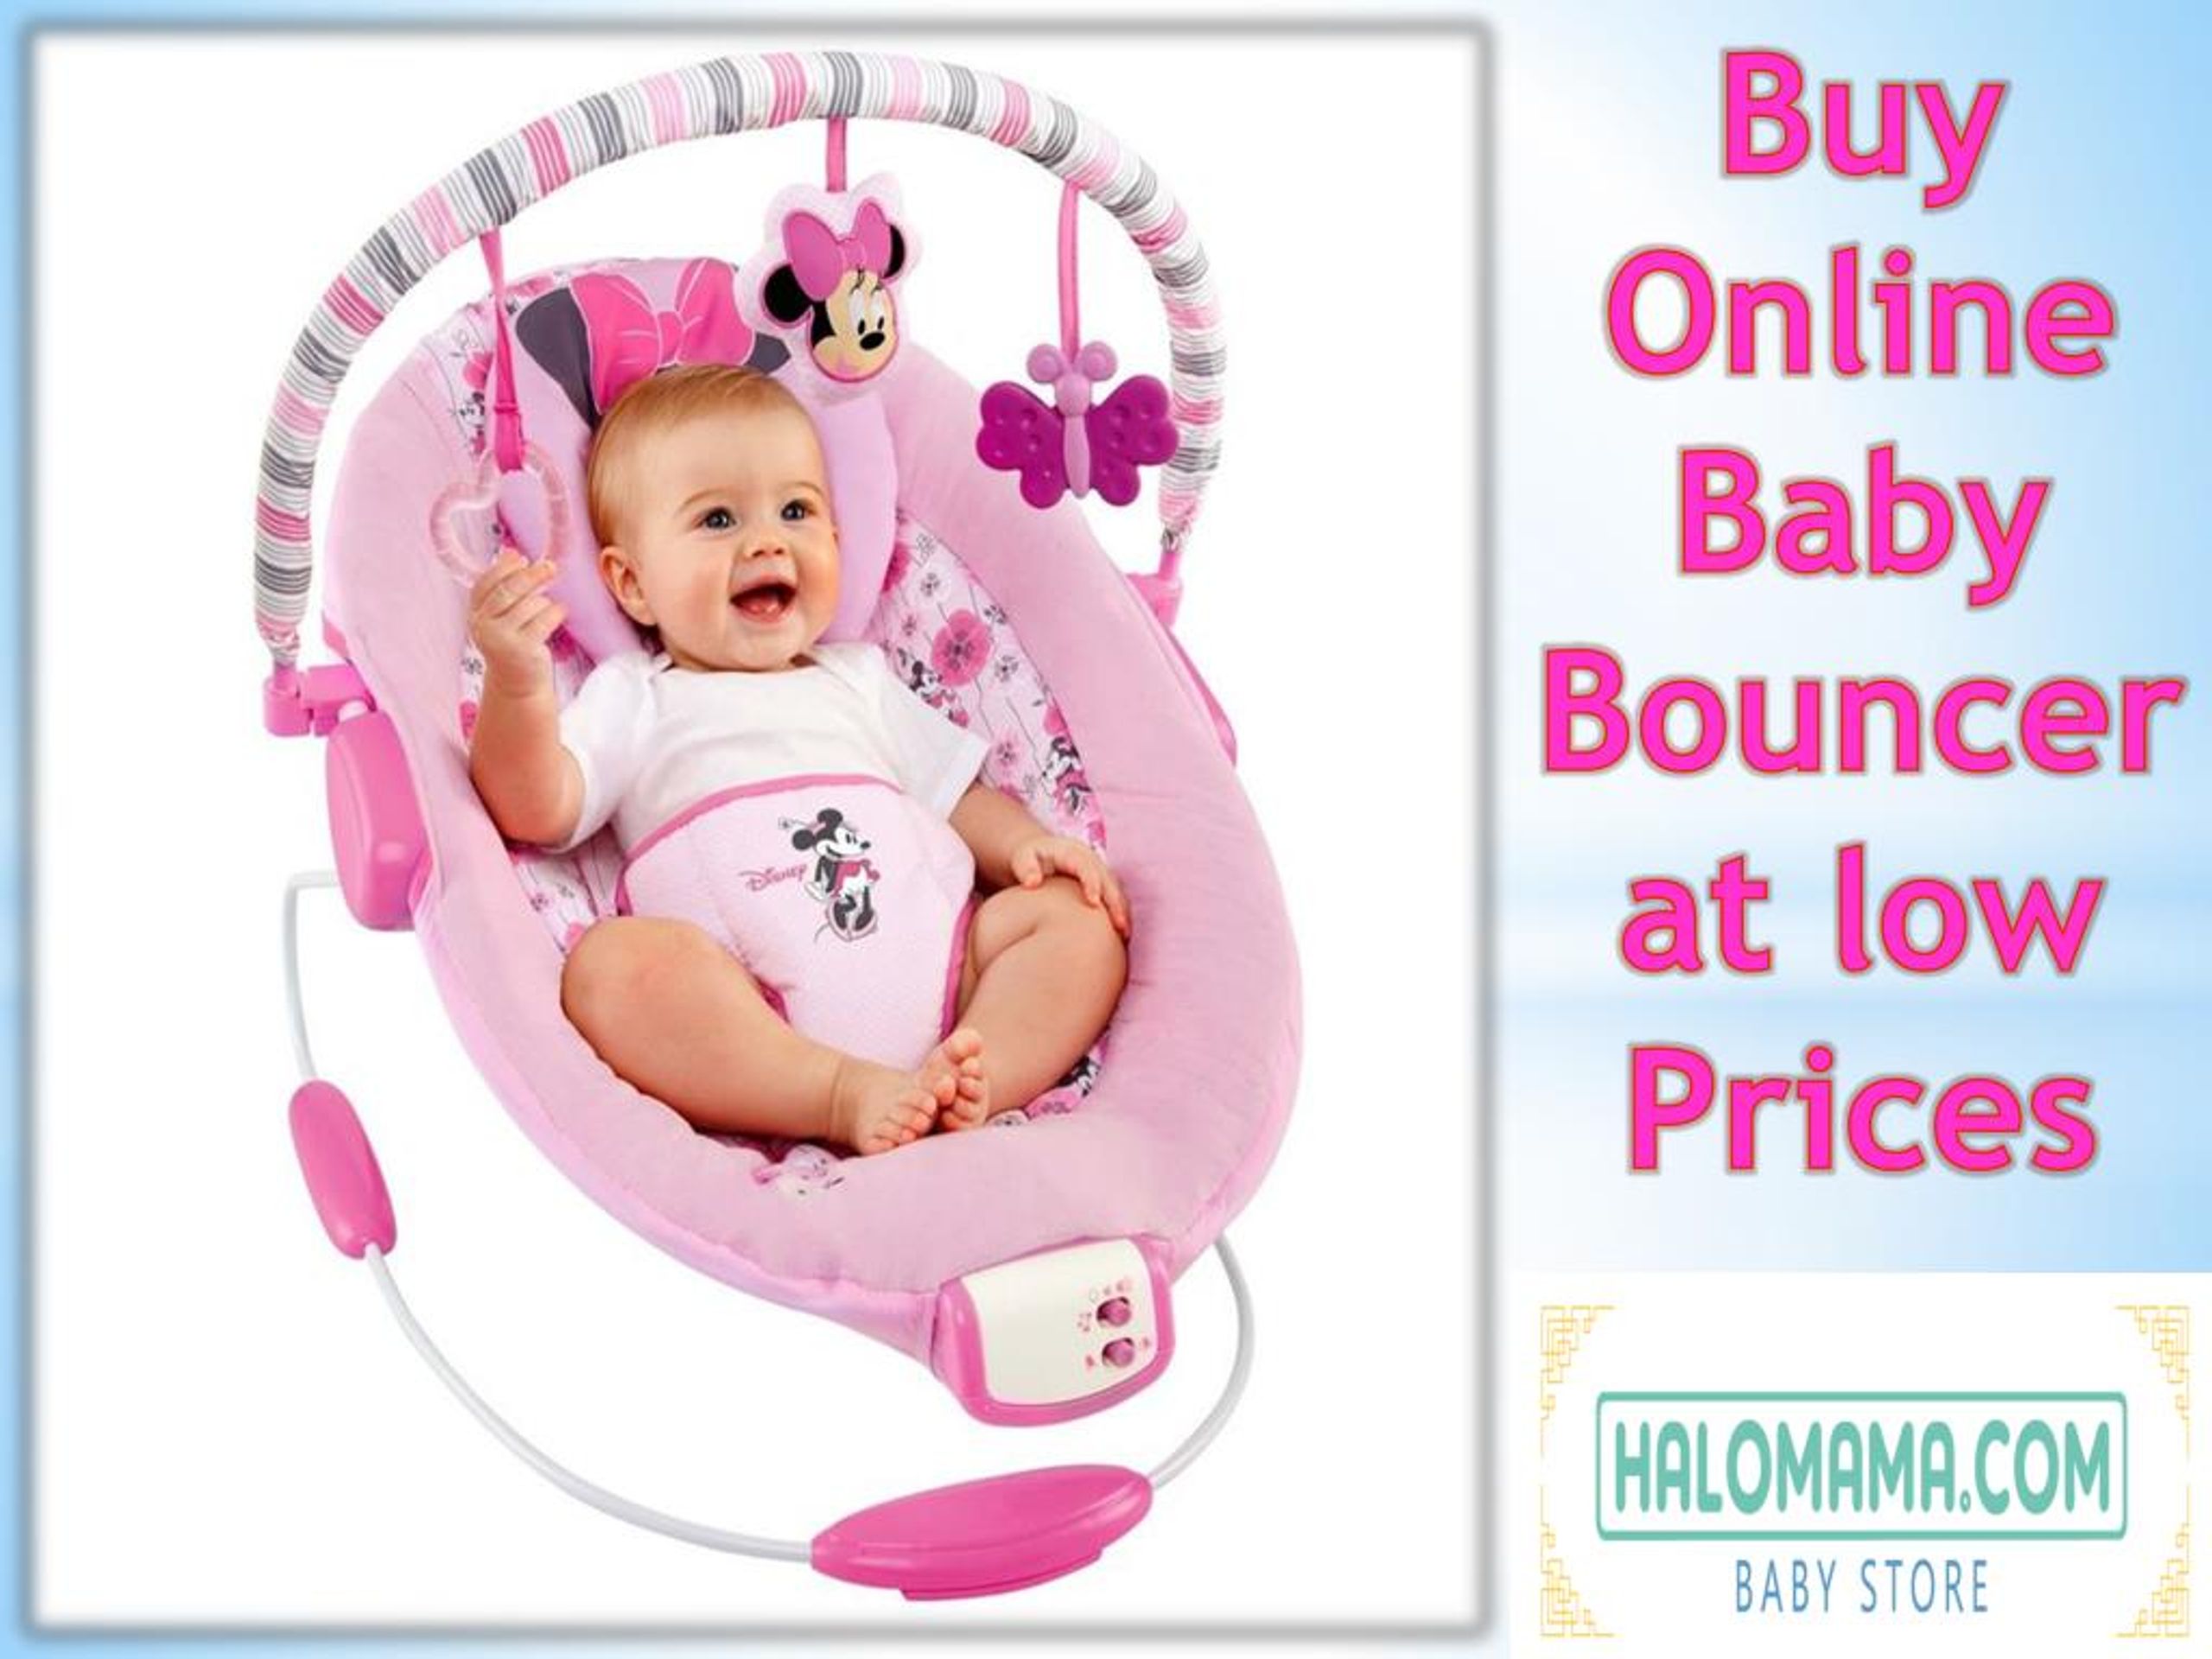 baby care products online shopping